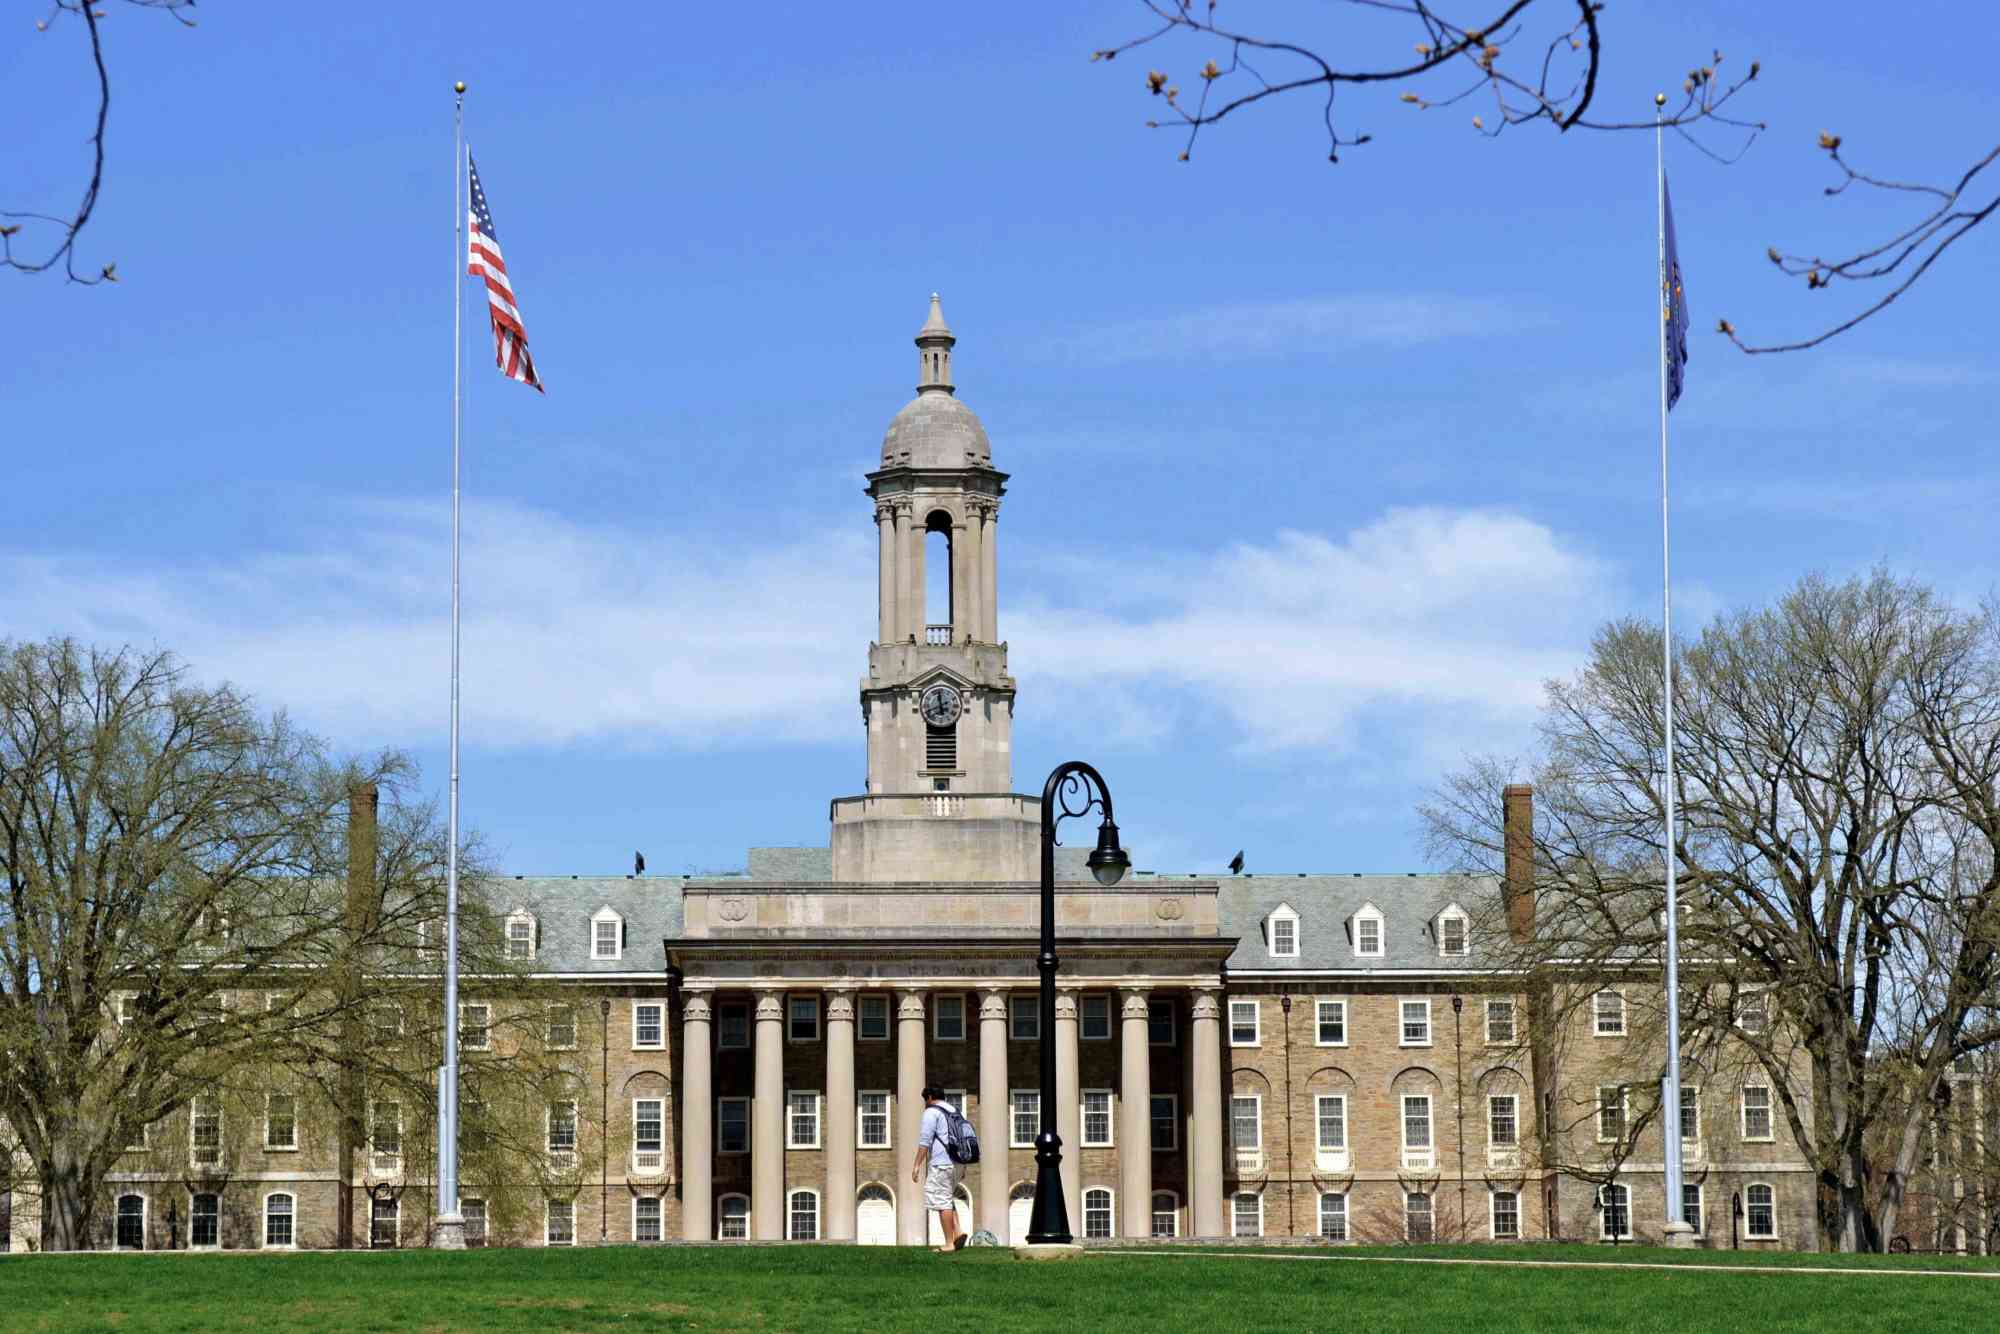 The Top 5 Penn State Tourist Attractions To Visit In State College